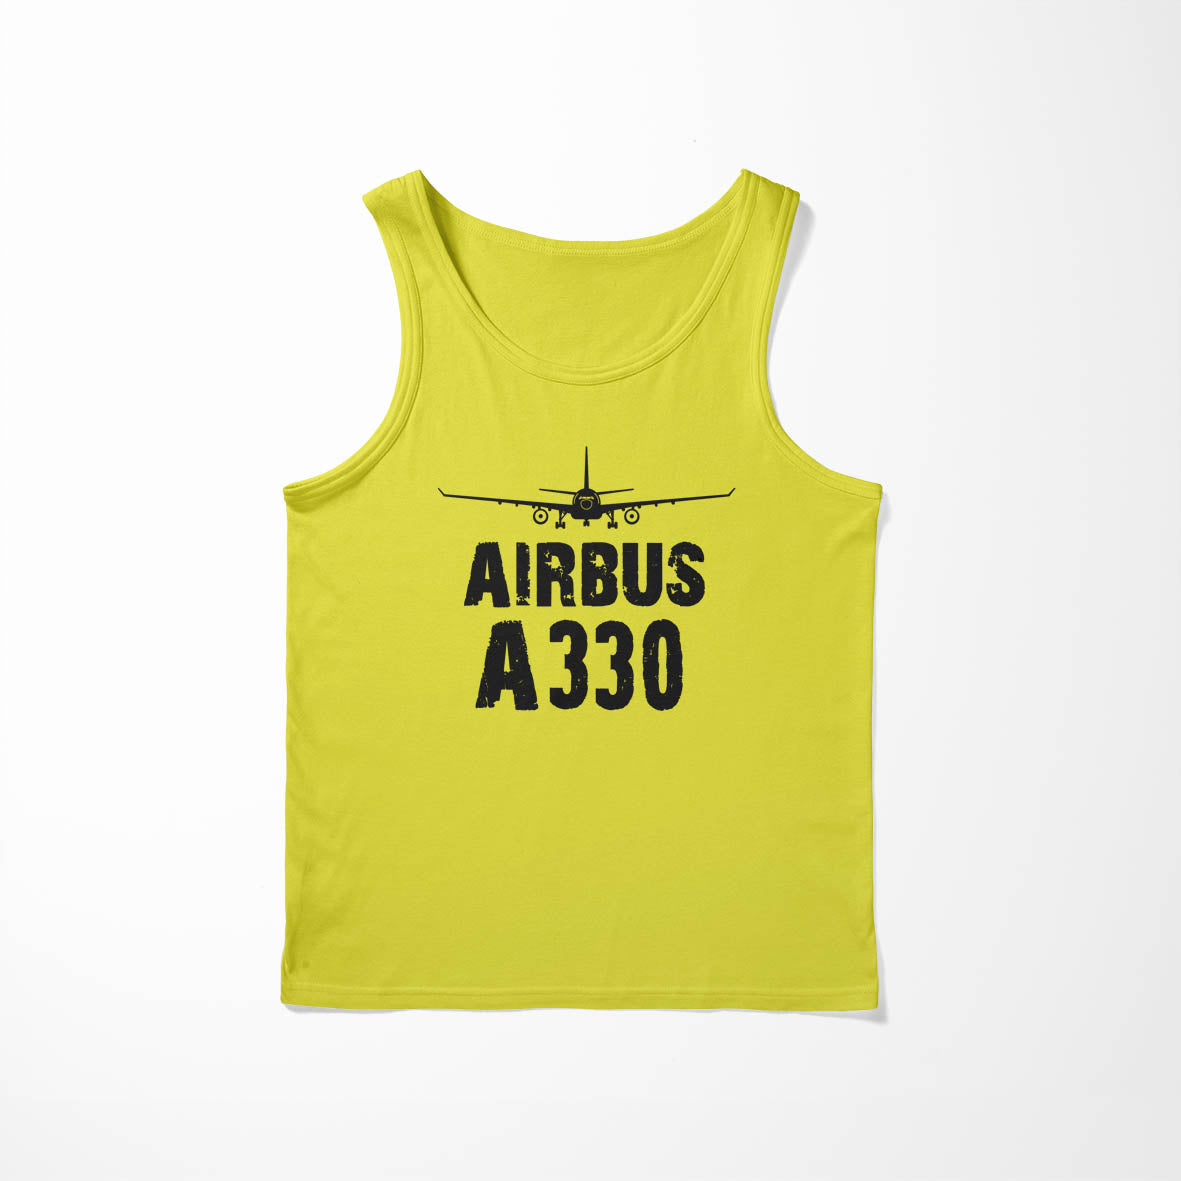 Airbus A330 & Plane Designed Tank Tops